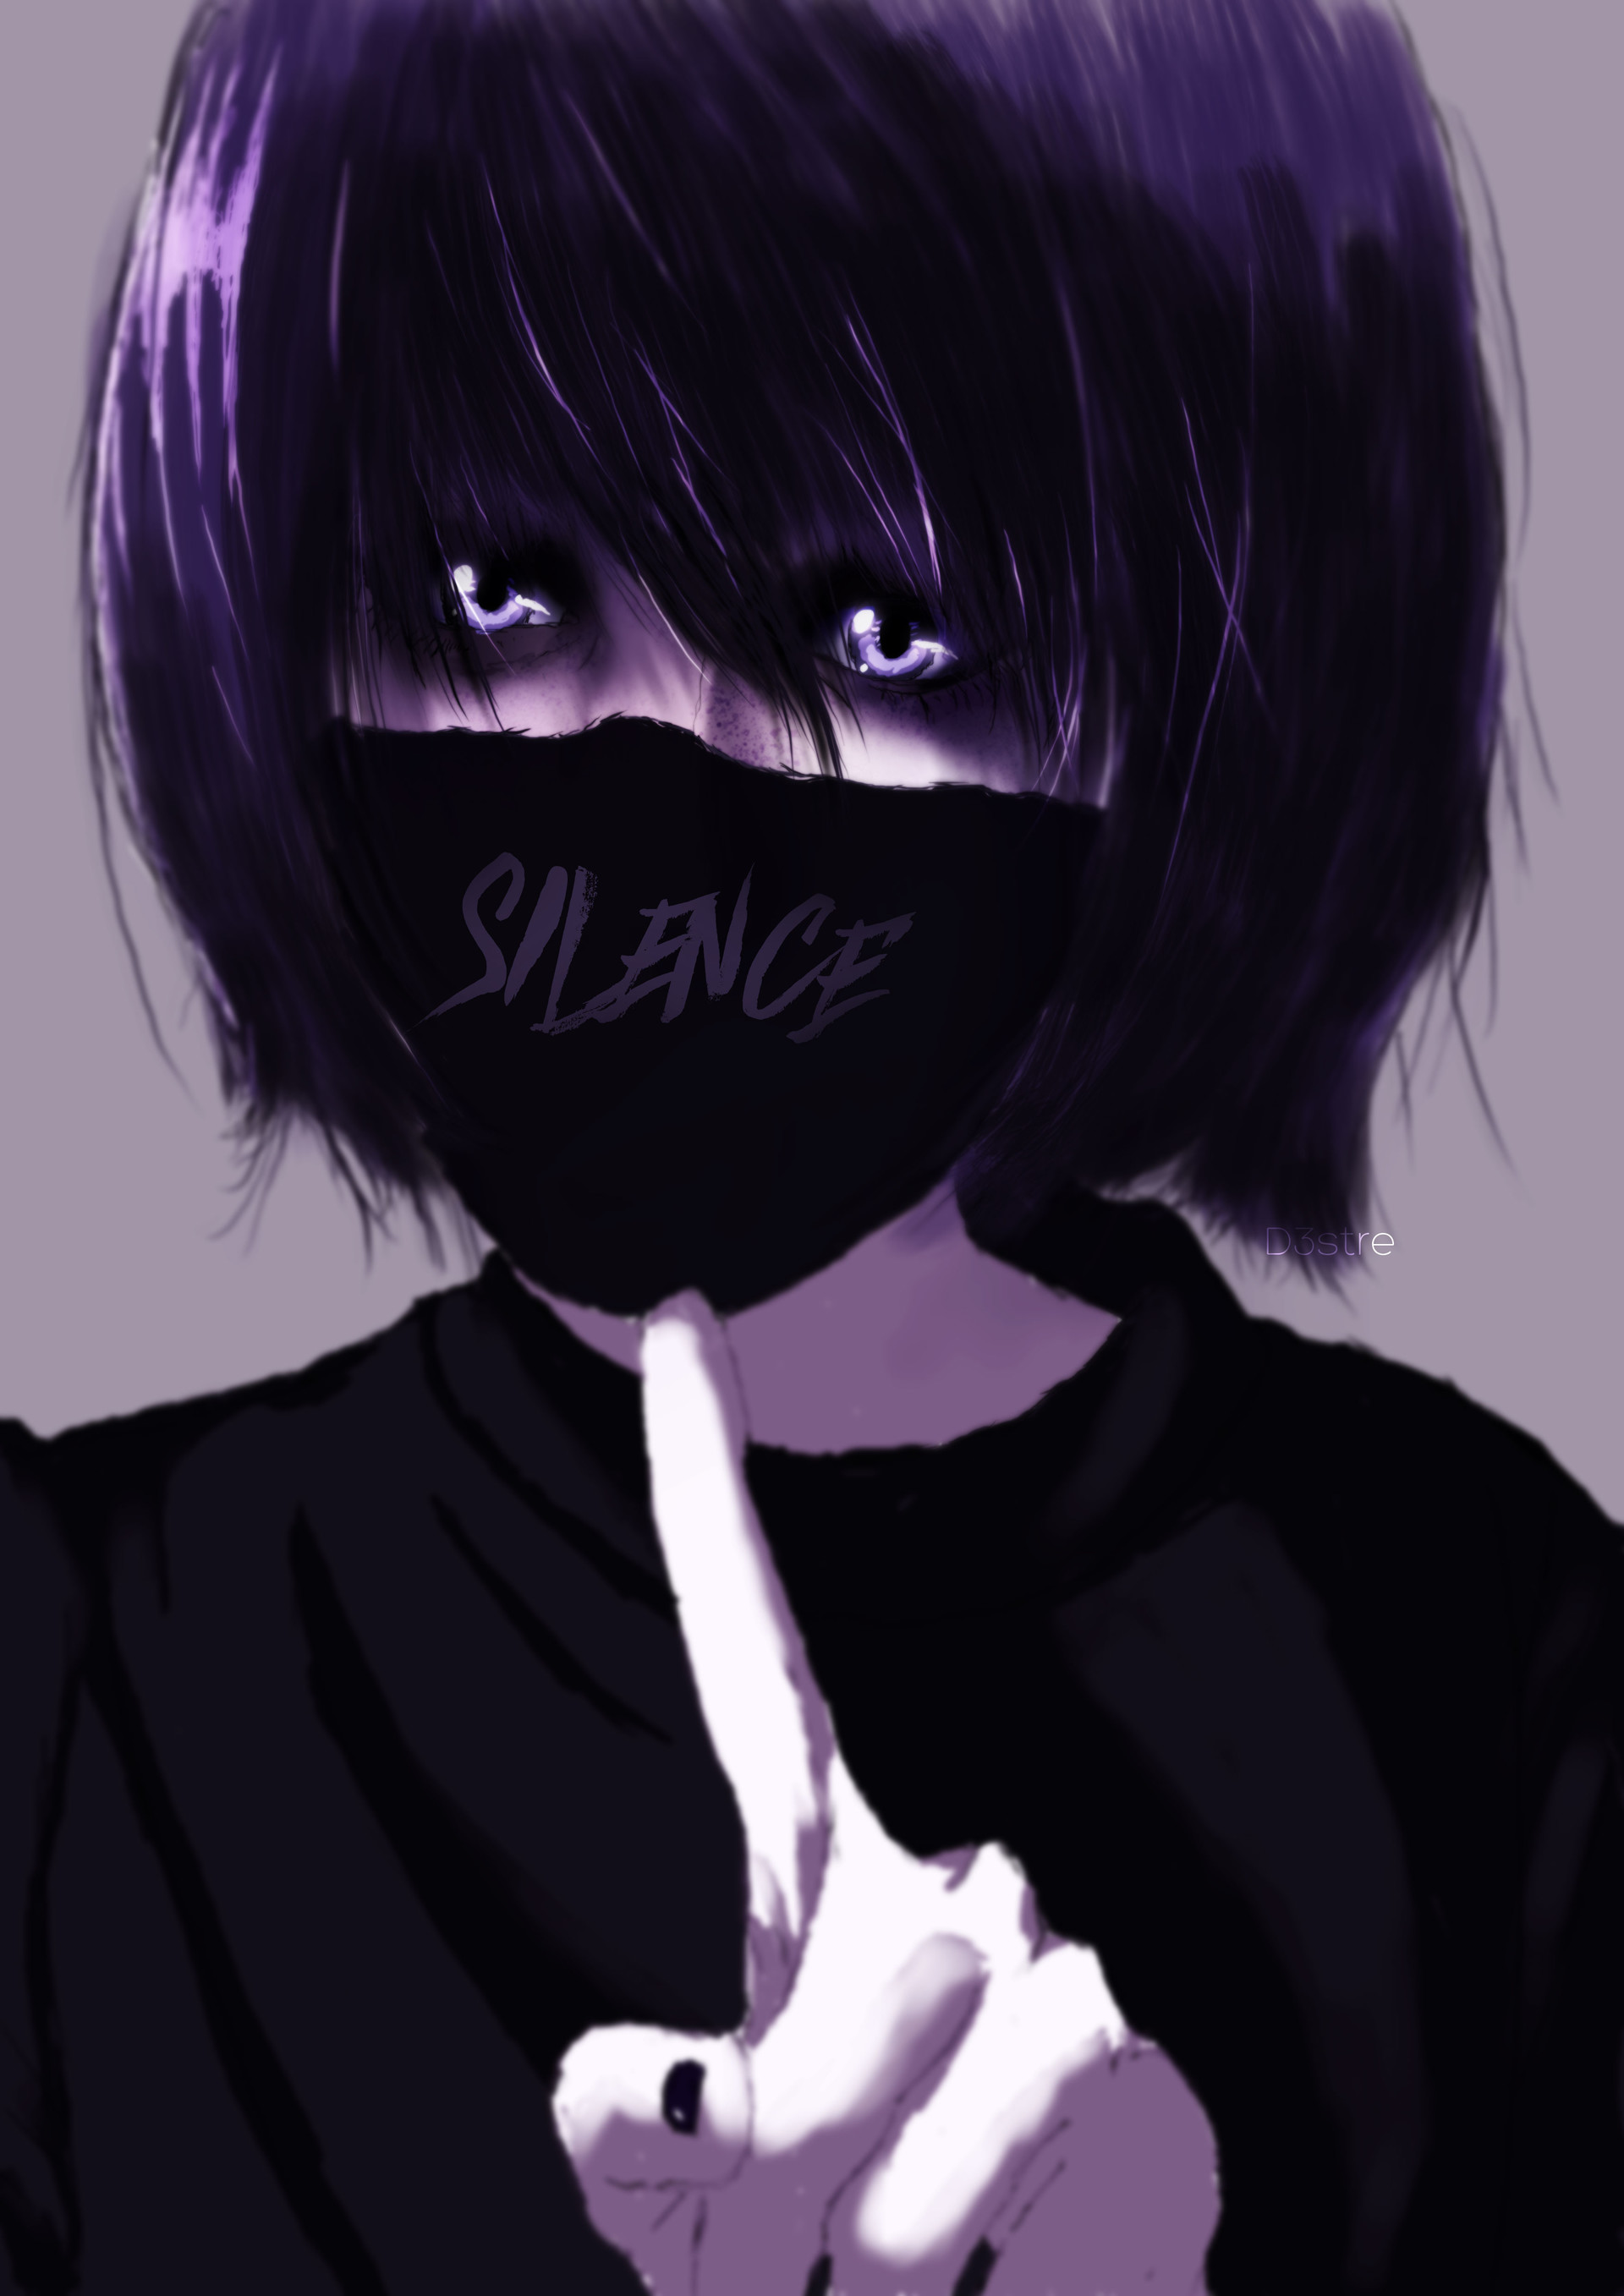 mask, silence, art, human, person, gesture